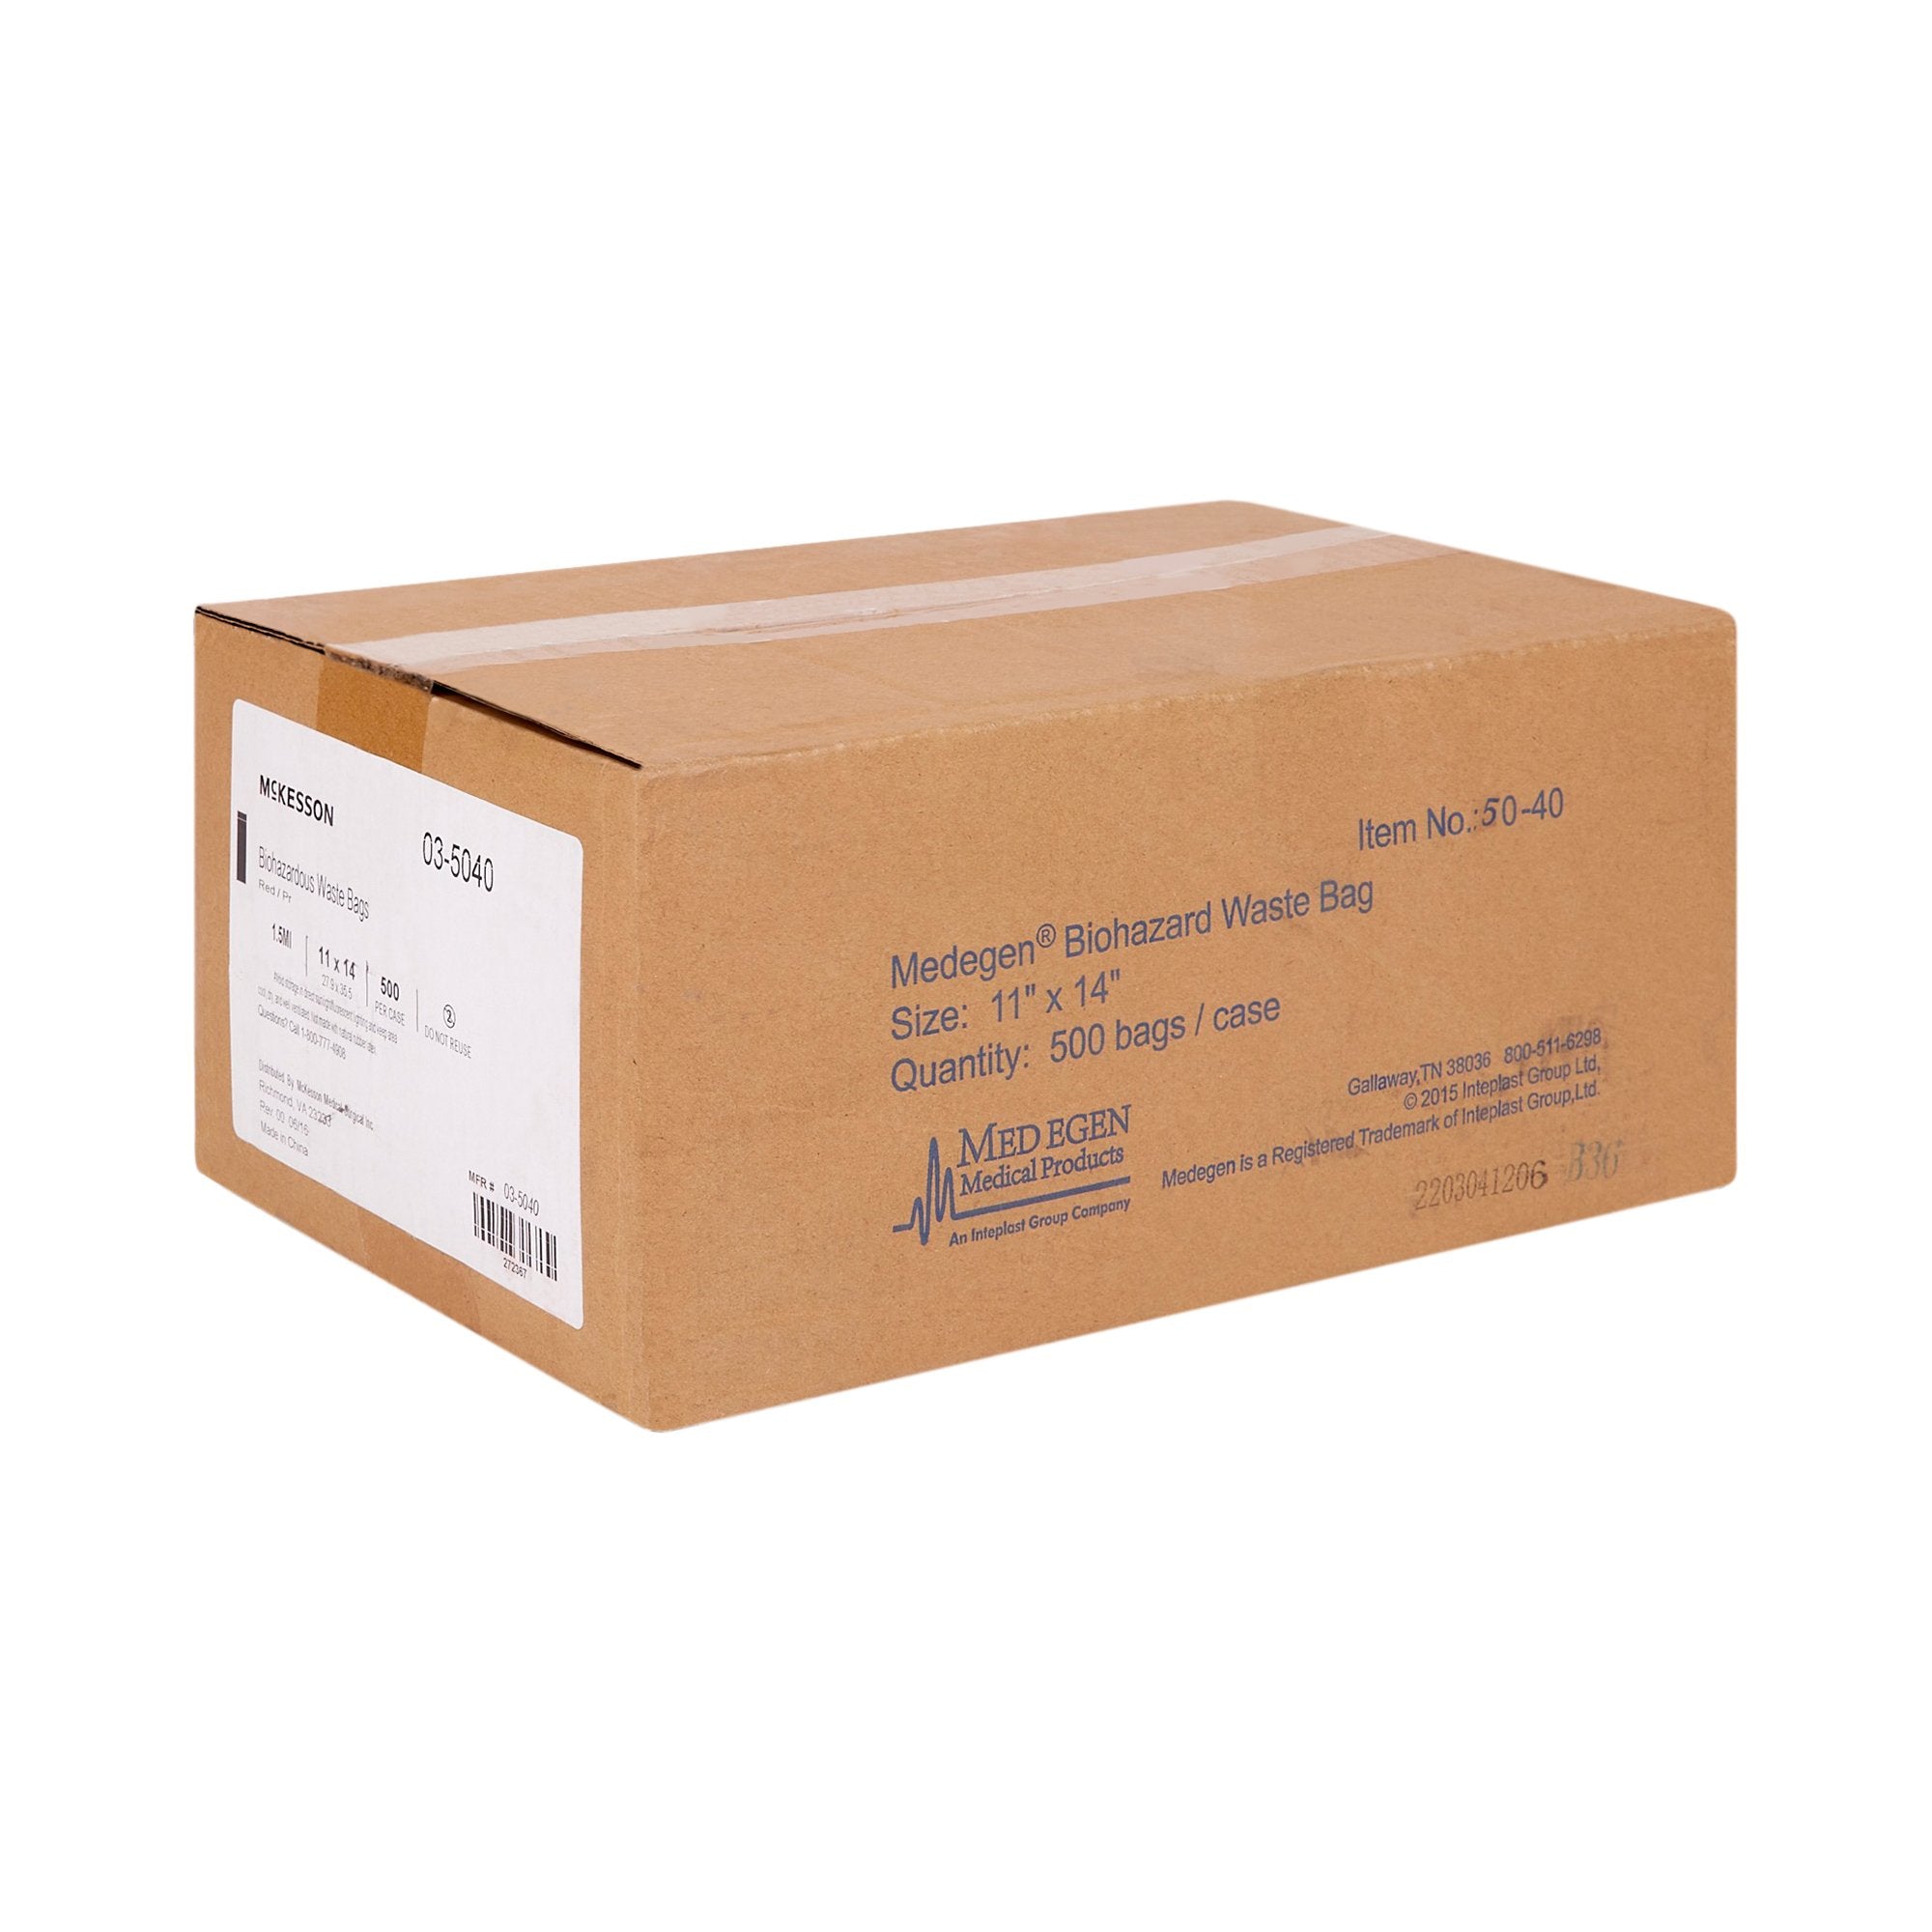 Infectious Waste Bag McKesson 1 to 6 gal. Red Bag 11 X 14 Inch